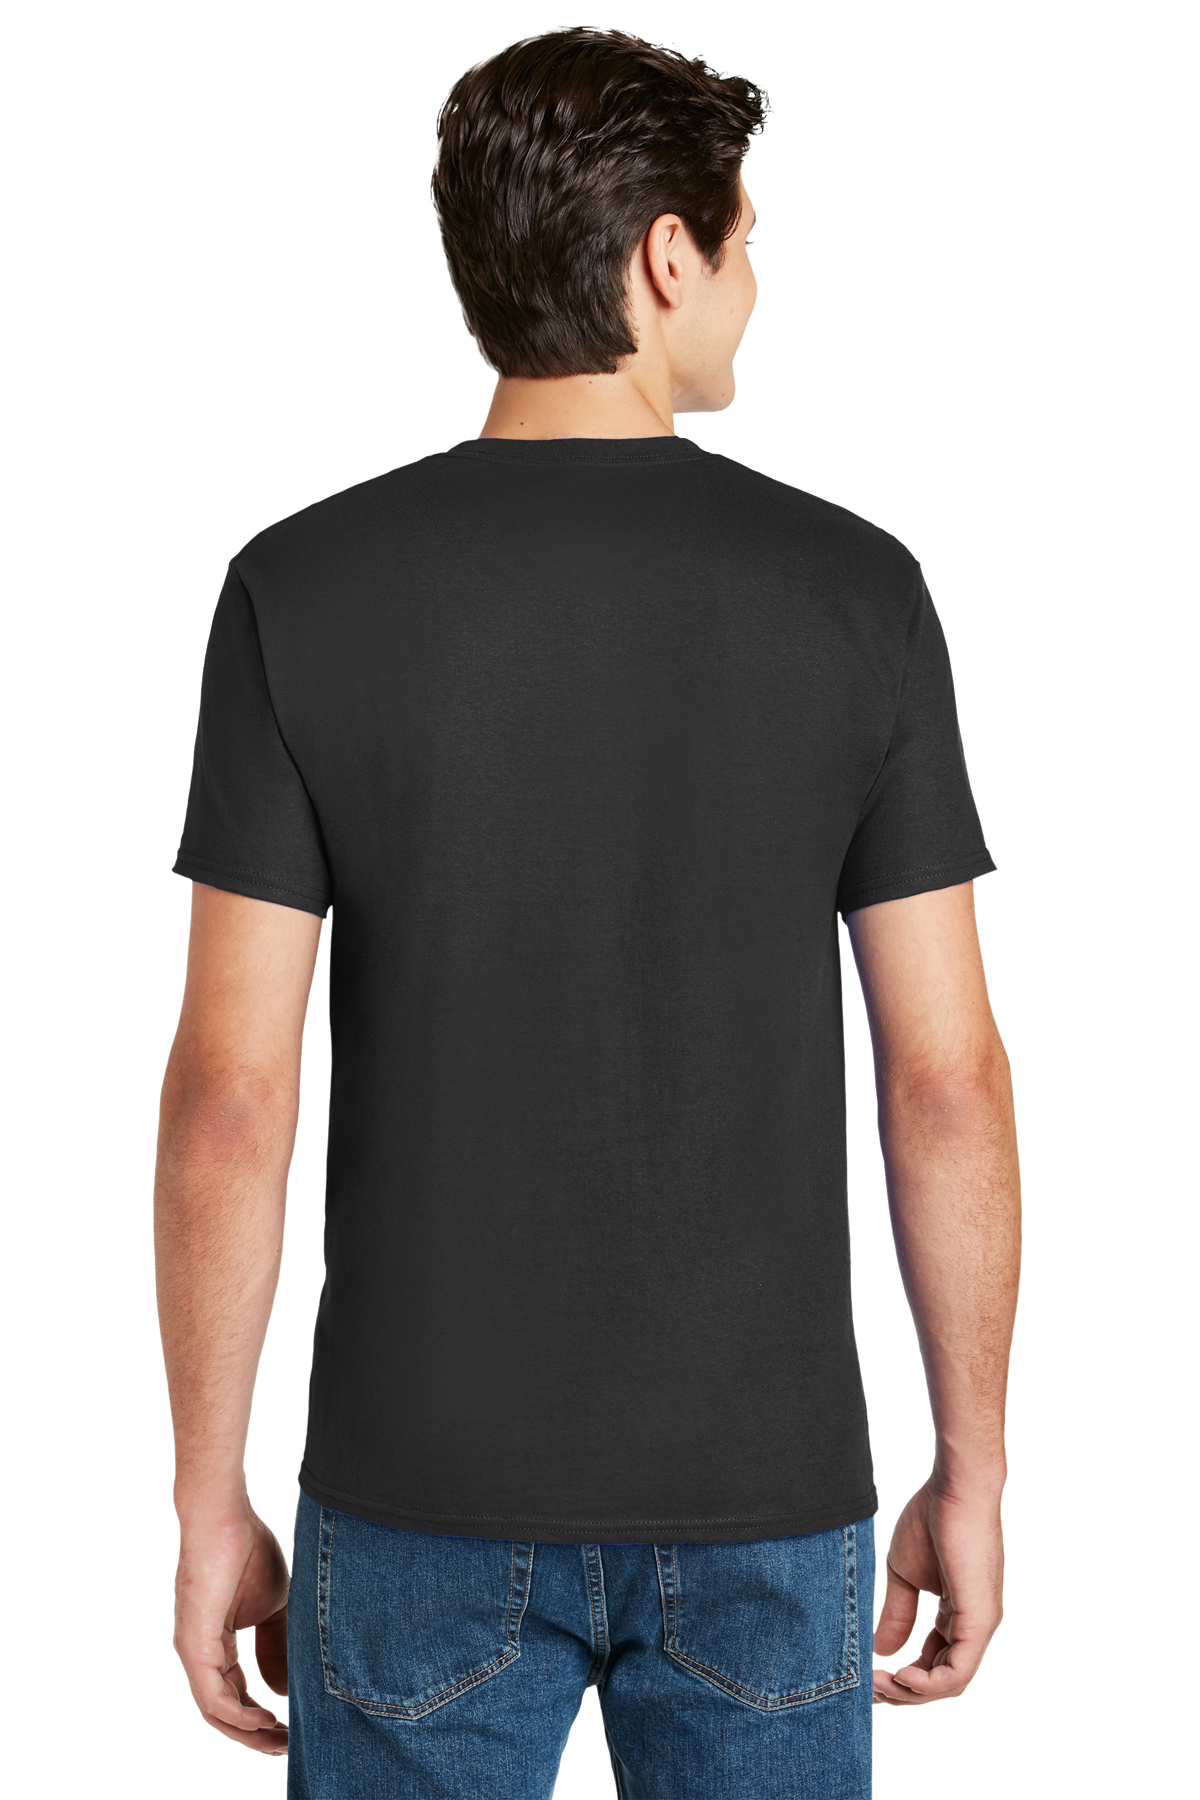 Hanes - 100% Cotton T-Shirt with Pocket | Product | SanMar